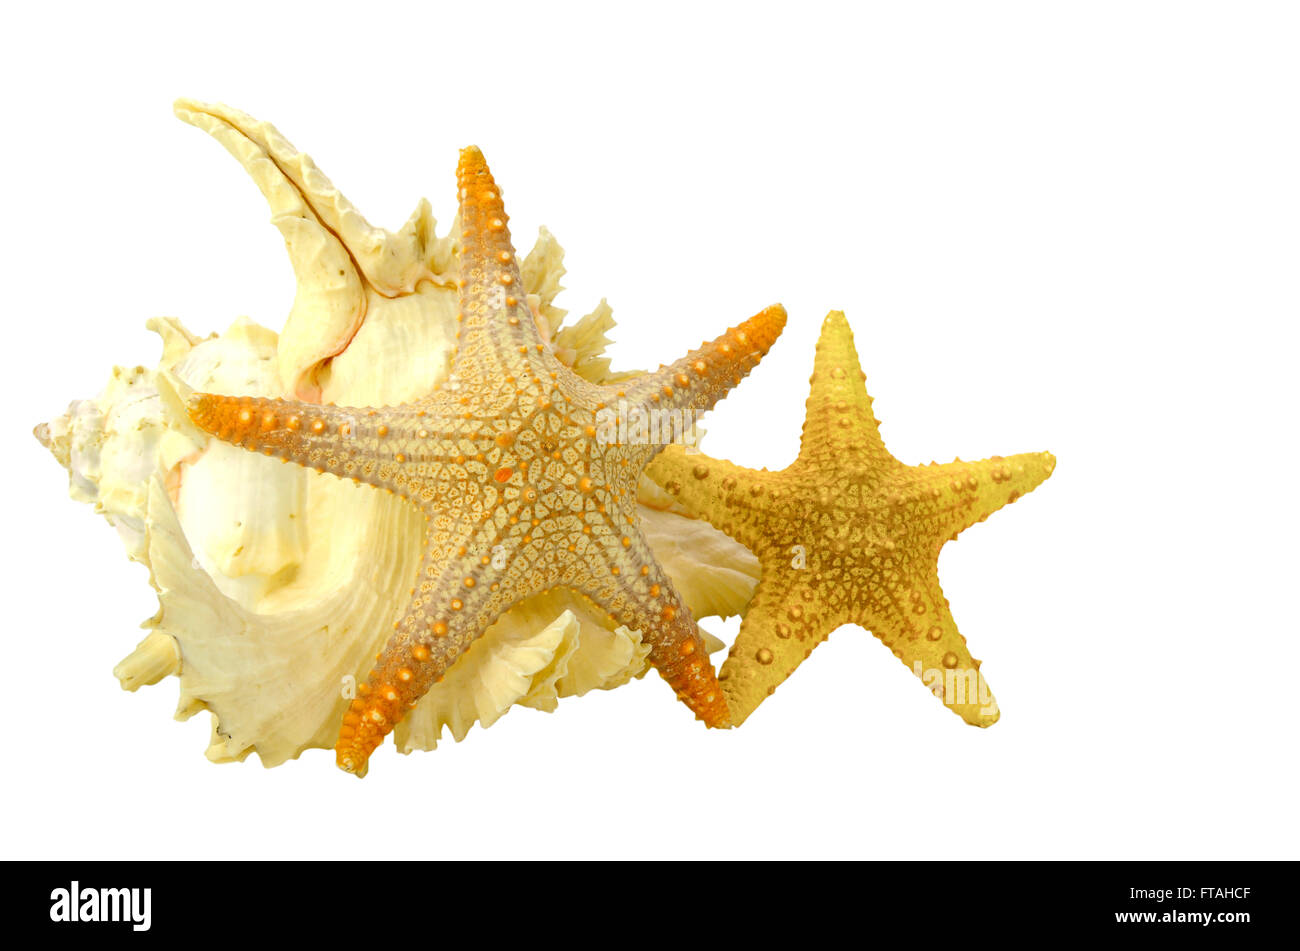 Seashell ane starfish isolated on white background with clipping-path. Stock Photo